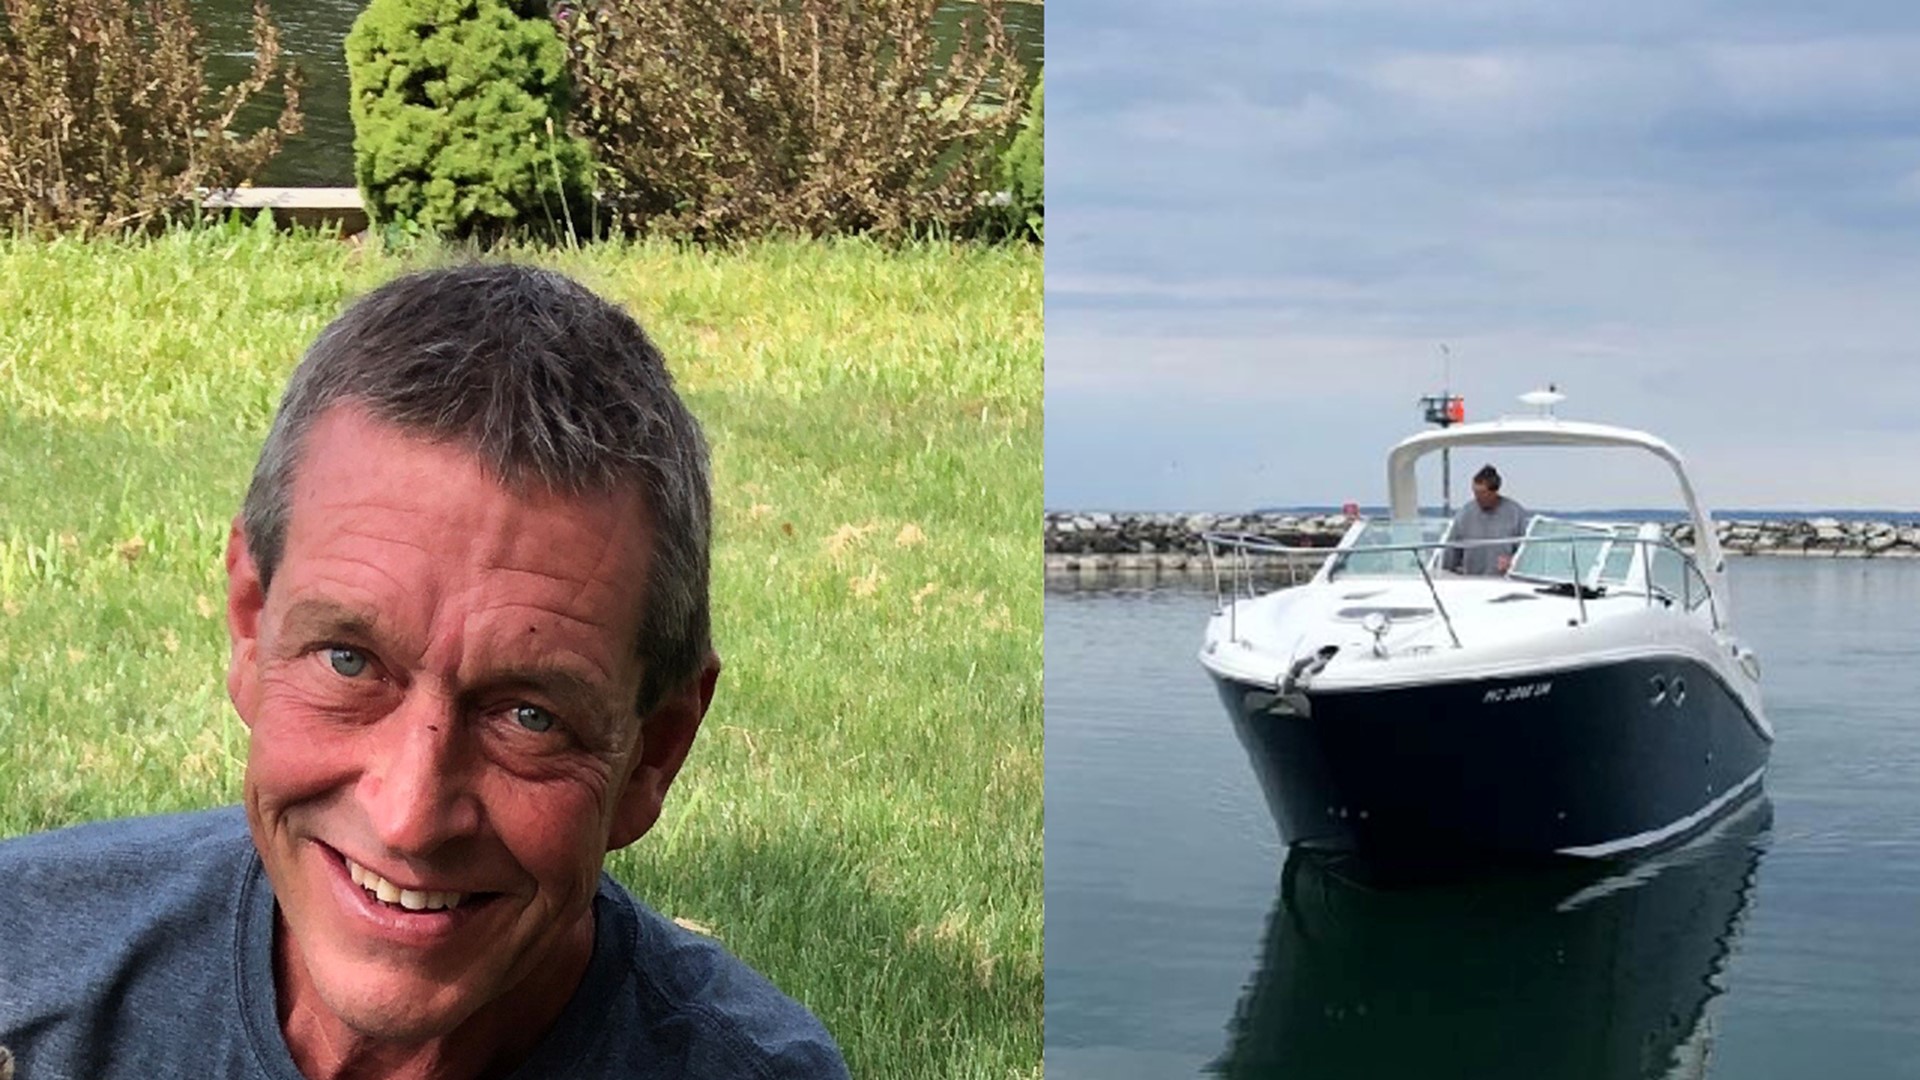 The US Coast Guard spotted the missing boat about 32 nautical miles West of Grand Haven. Crews said 61-year-old David Split was not on board.